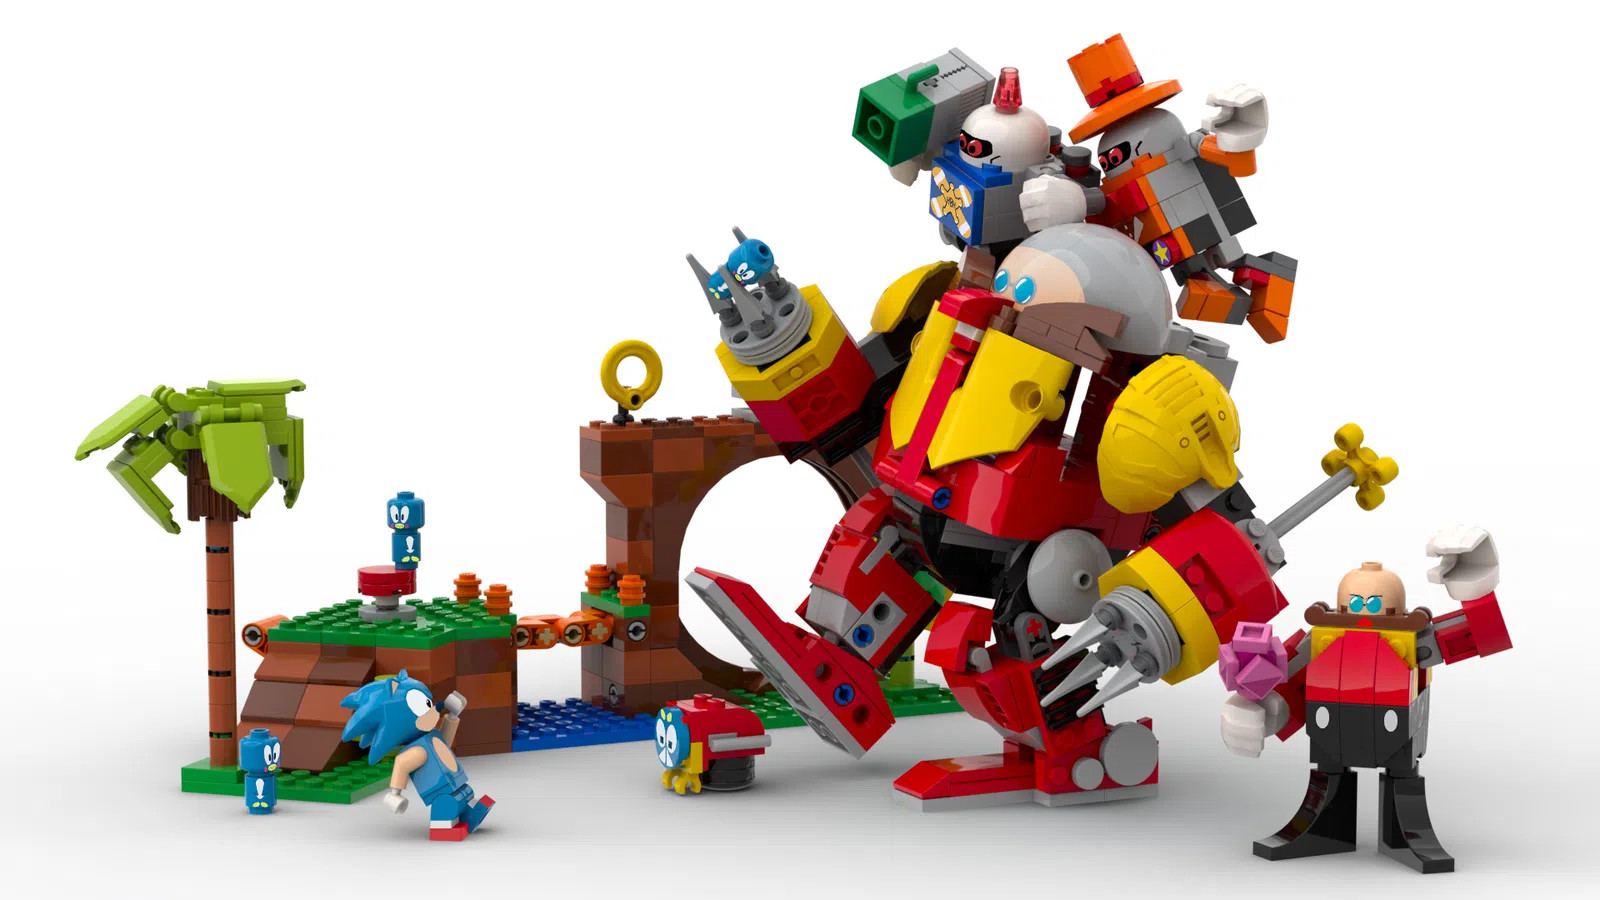 It’s Official, Lego Is Making A Sonic The Hedgehog Set